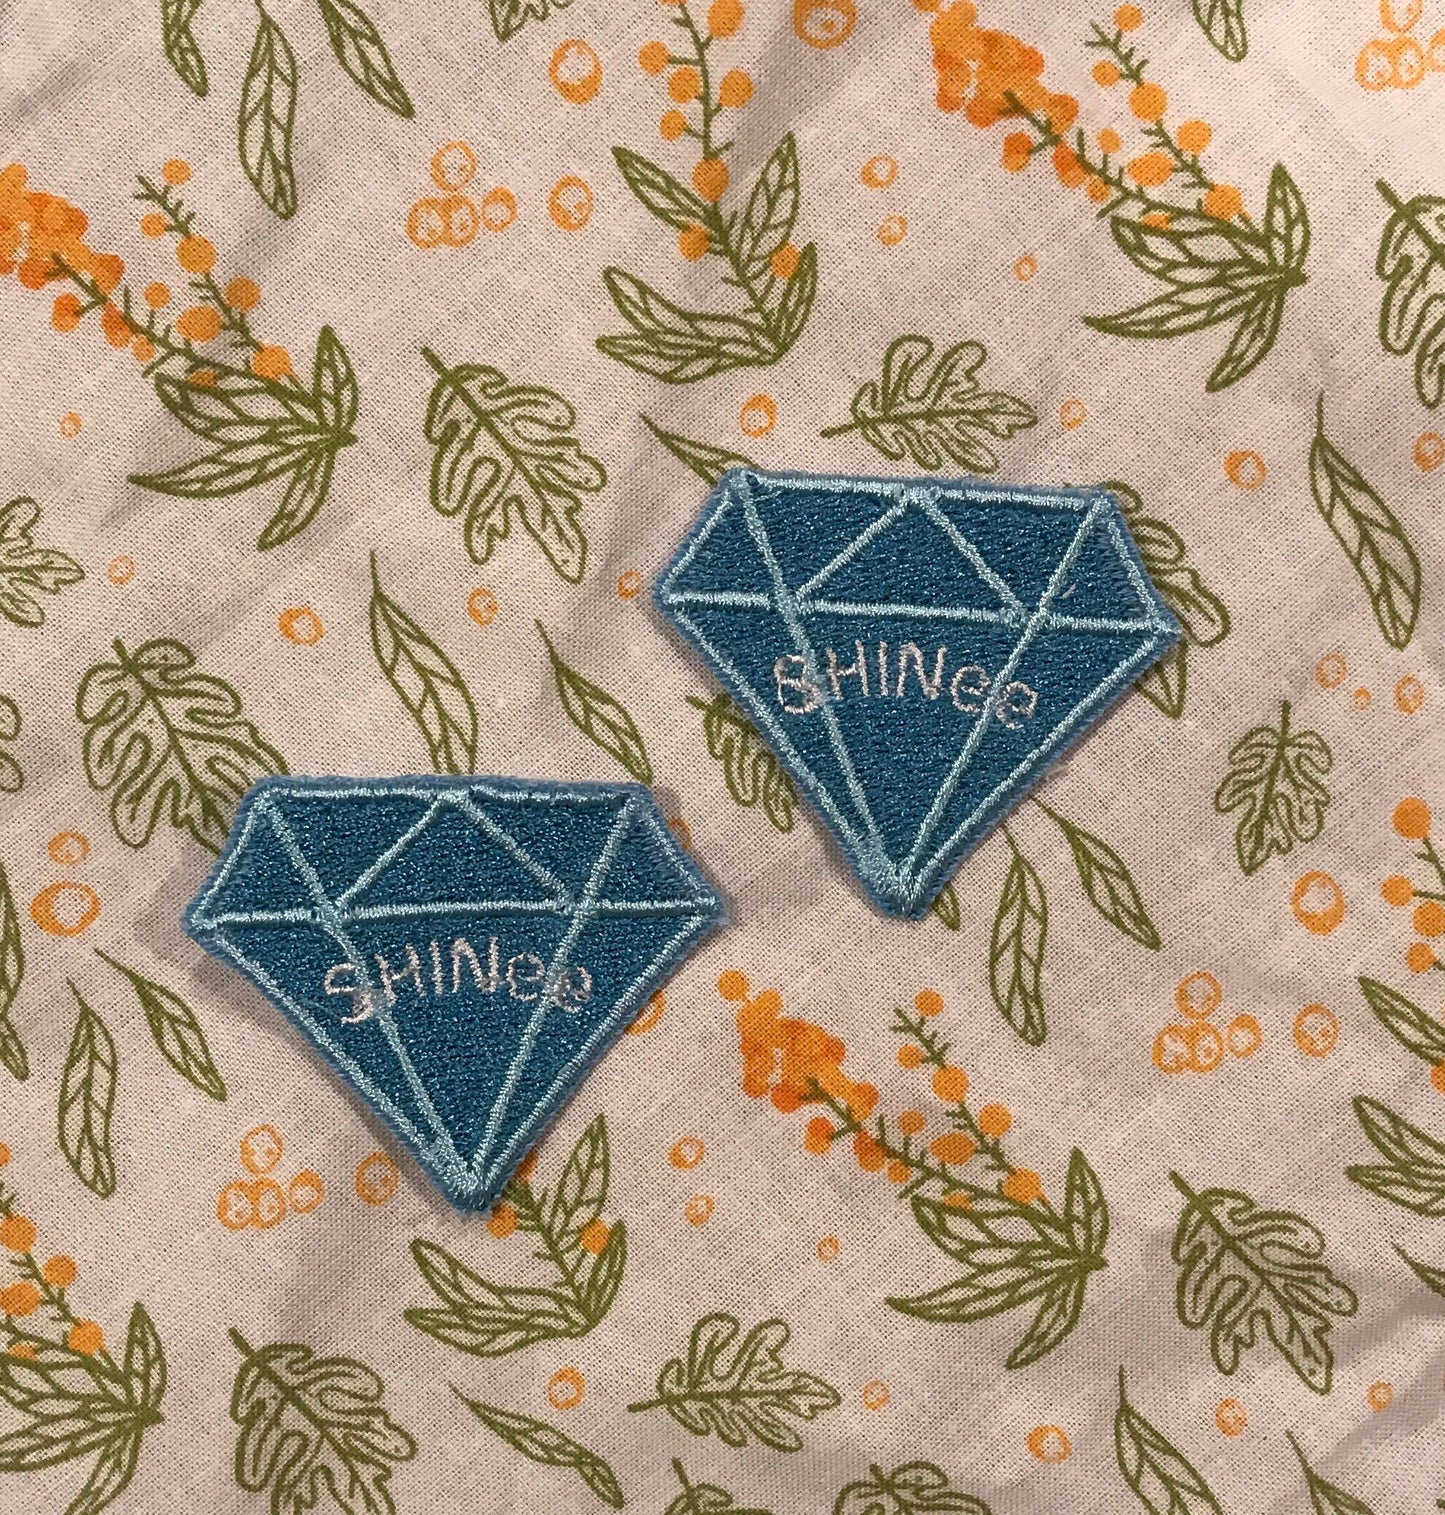 Teal Diamond SHINee Embroidered Patch